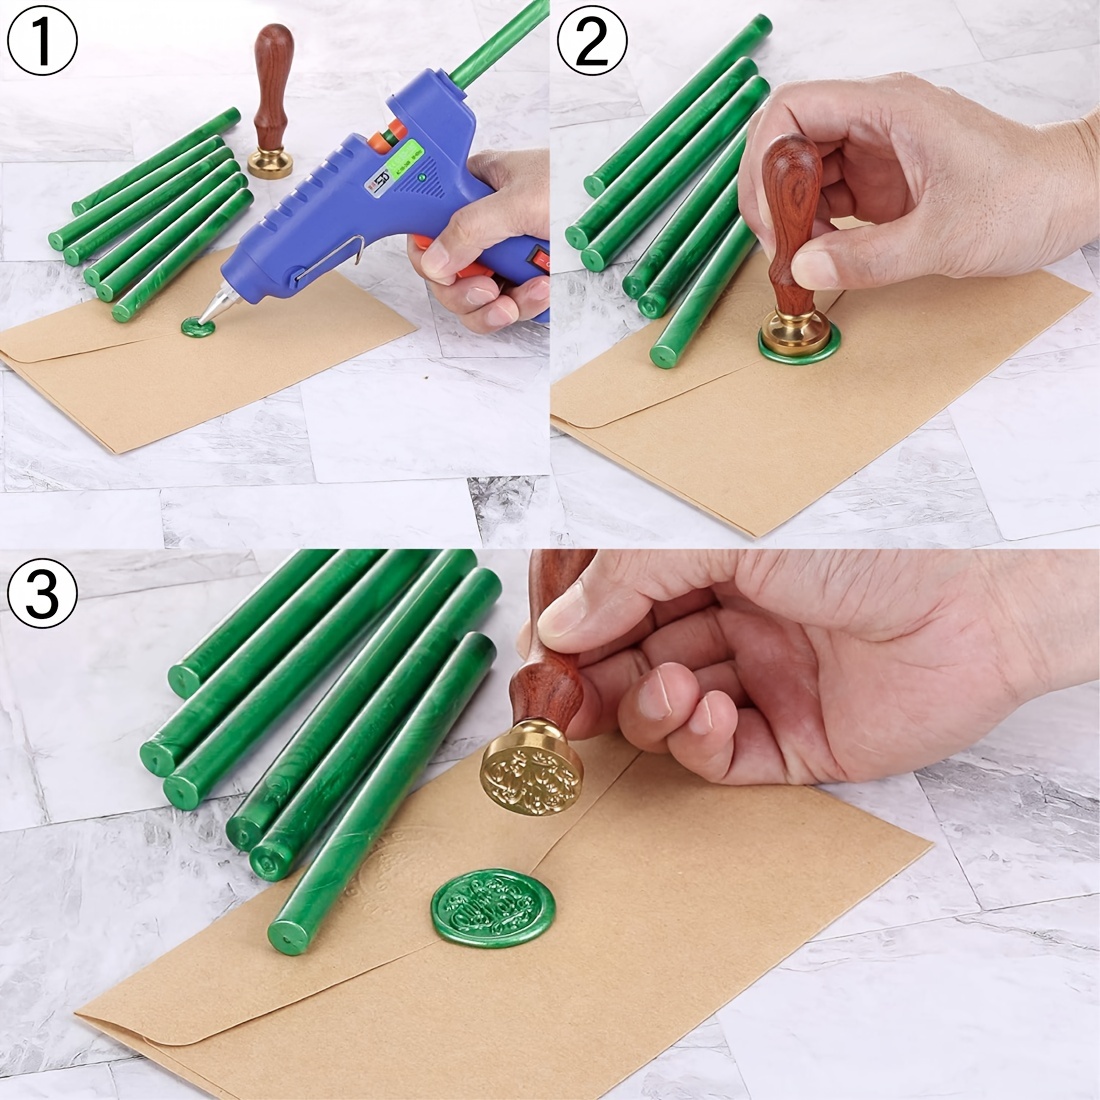  Pearl Blue Sealing Wax Sticks STAMPMASTER 20pcs Mini Pearl Blue  Wax Sticks Glue Gun Seal Sticks for Invitation Letters Envelope Cards  Crafts Christmas Package Decoration : Arts, Crafts & Sewing